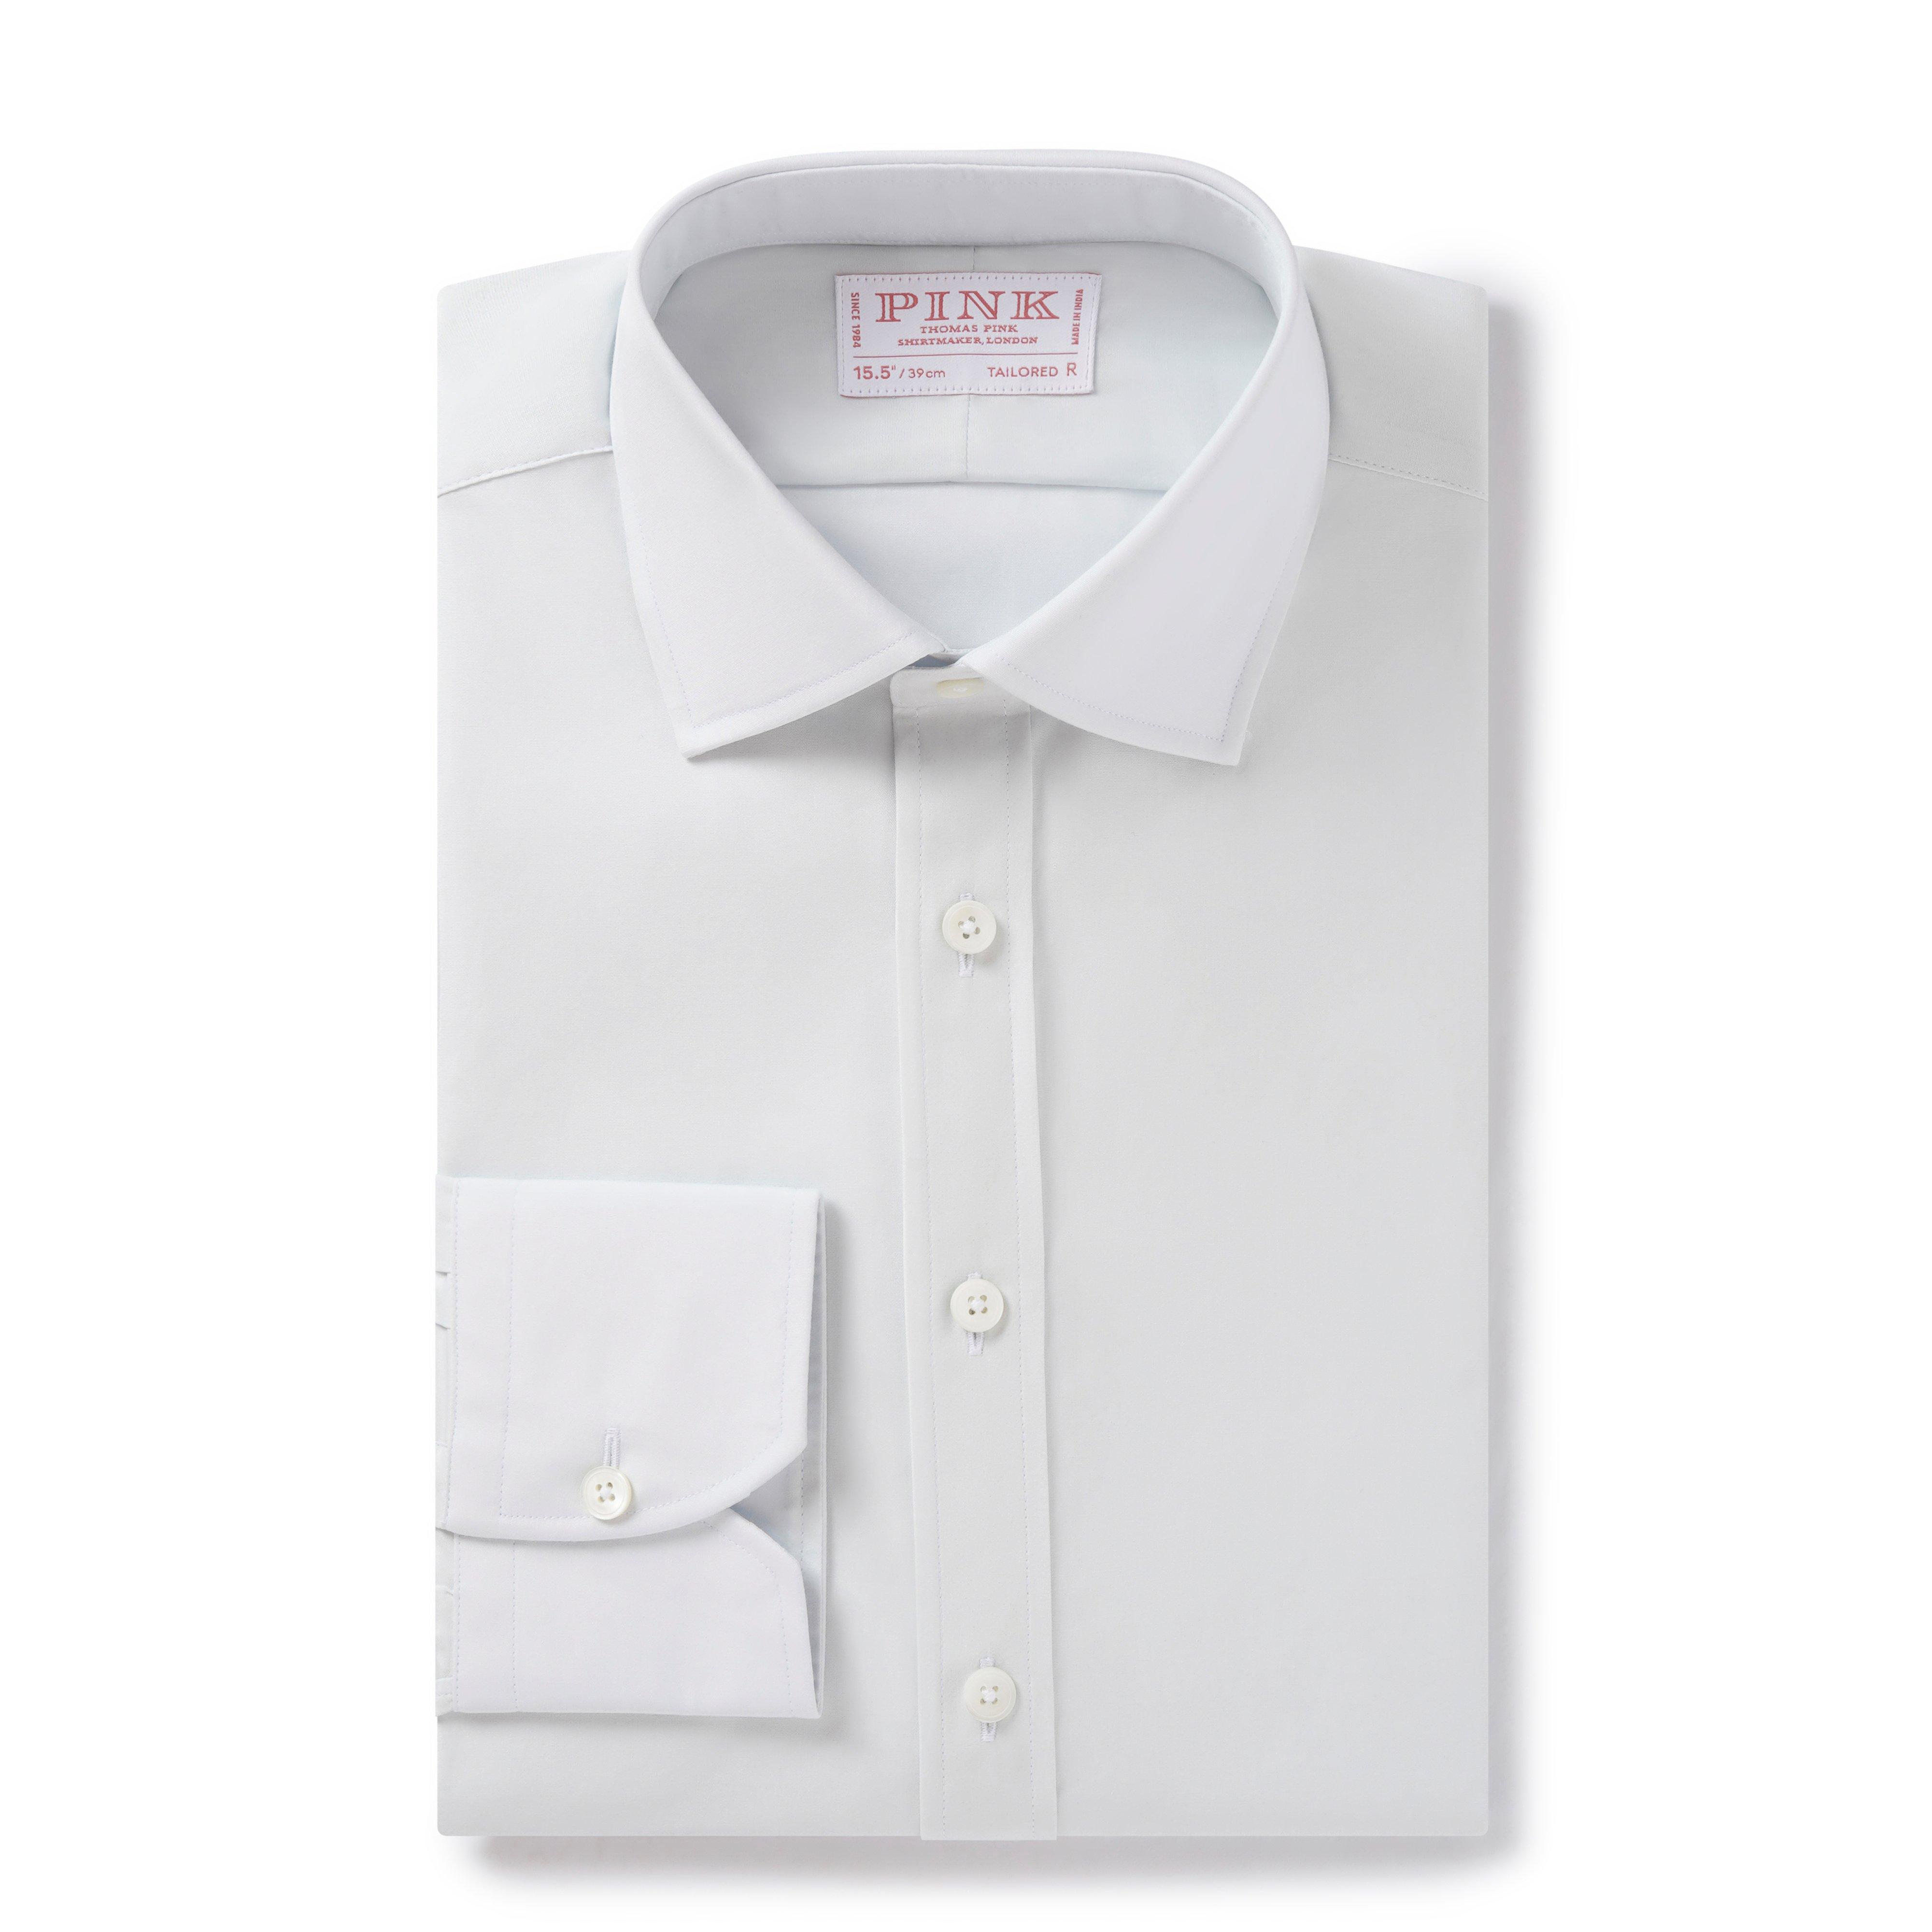 Thomas Pink Gets Down To Business With New Dress Shirt Range